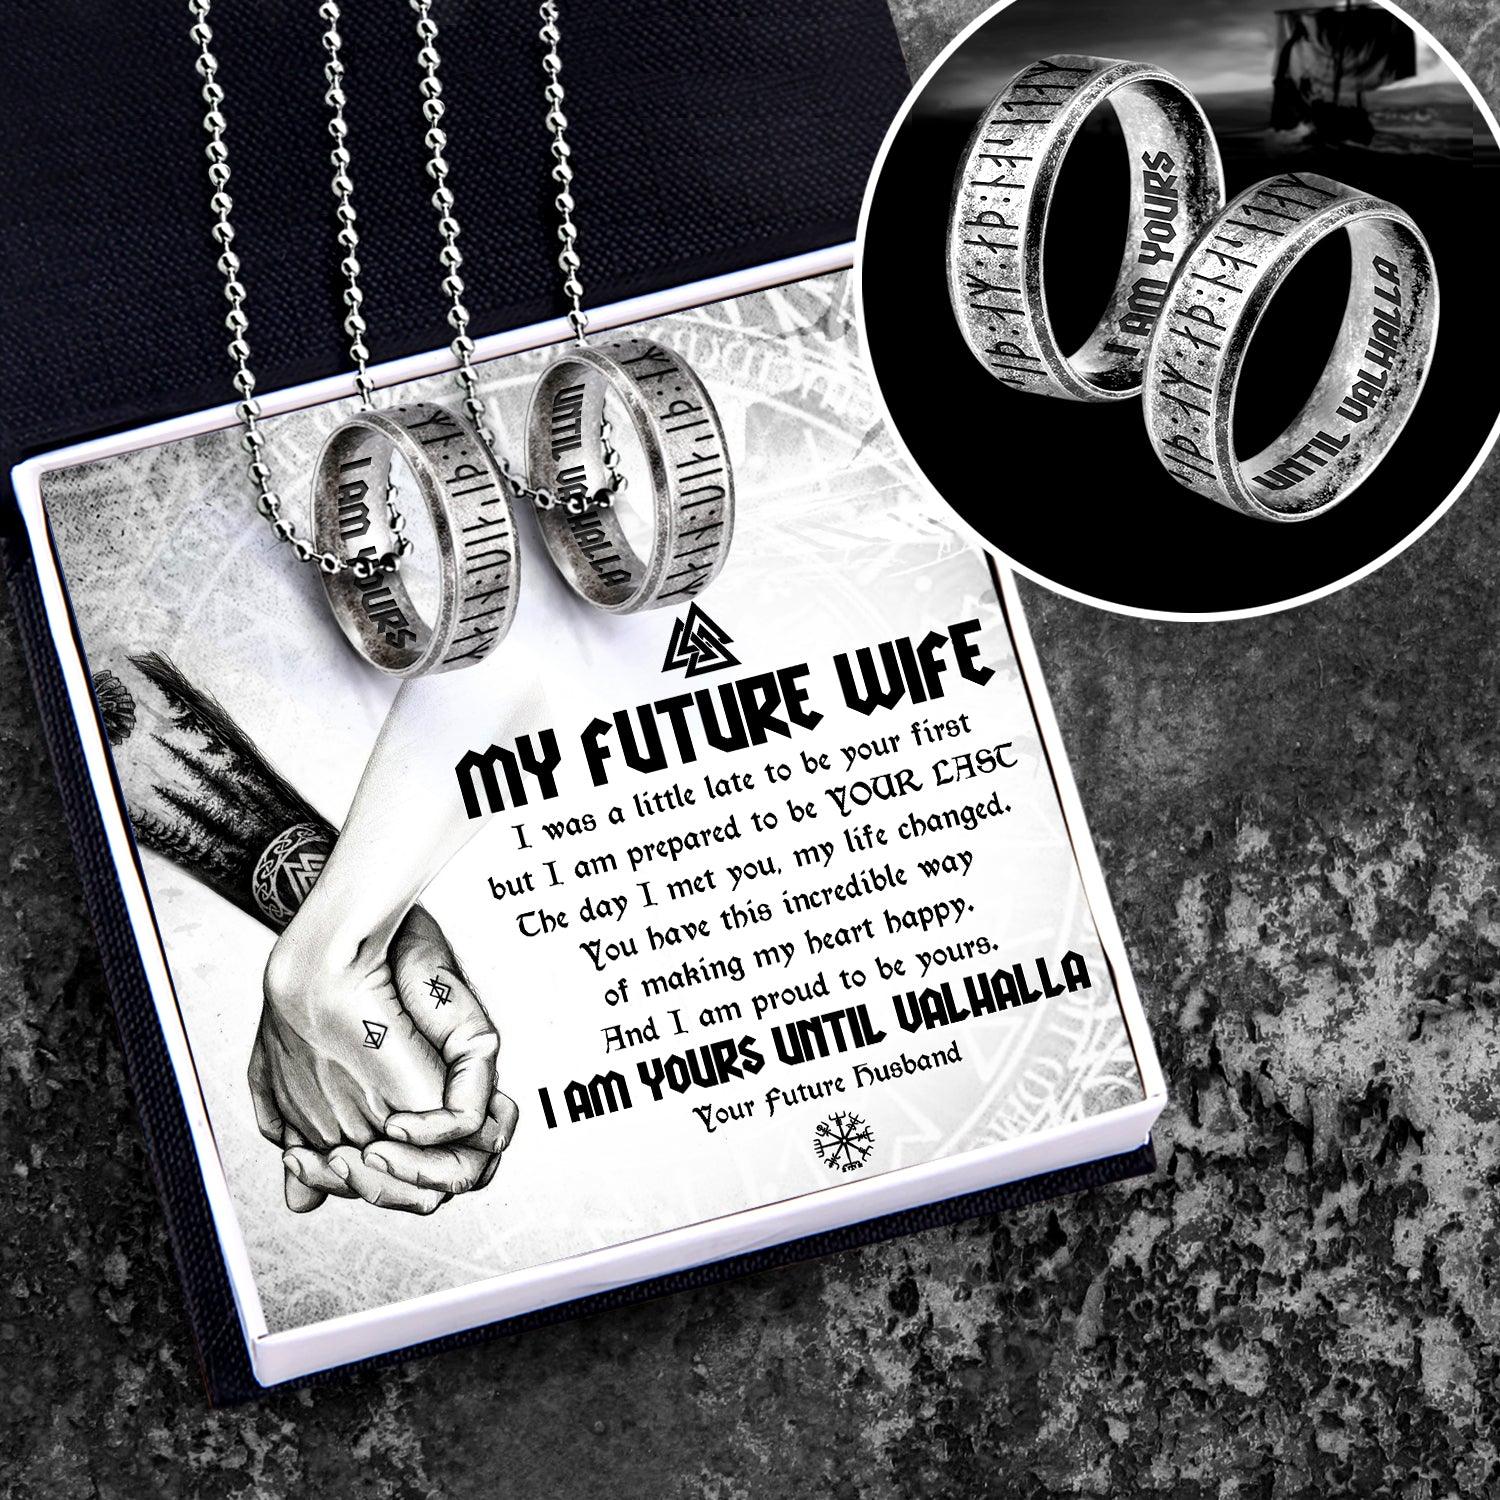 Couple Rune Ring Necklaces - Viking - To My Future Wife - The Day I Met You, My Life Changed - Augndx25001 - Gifts Holder